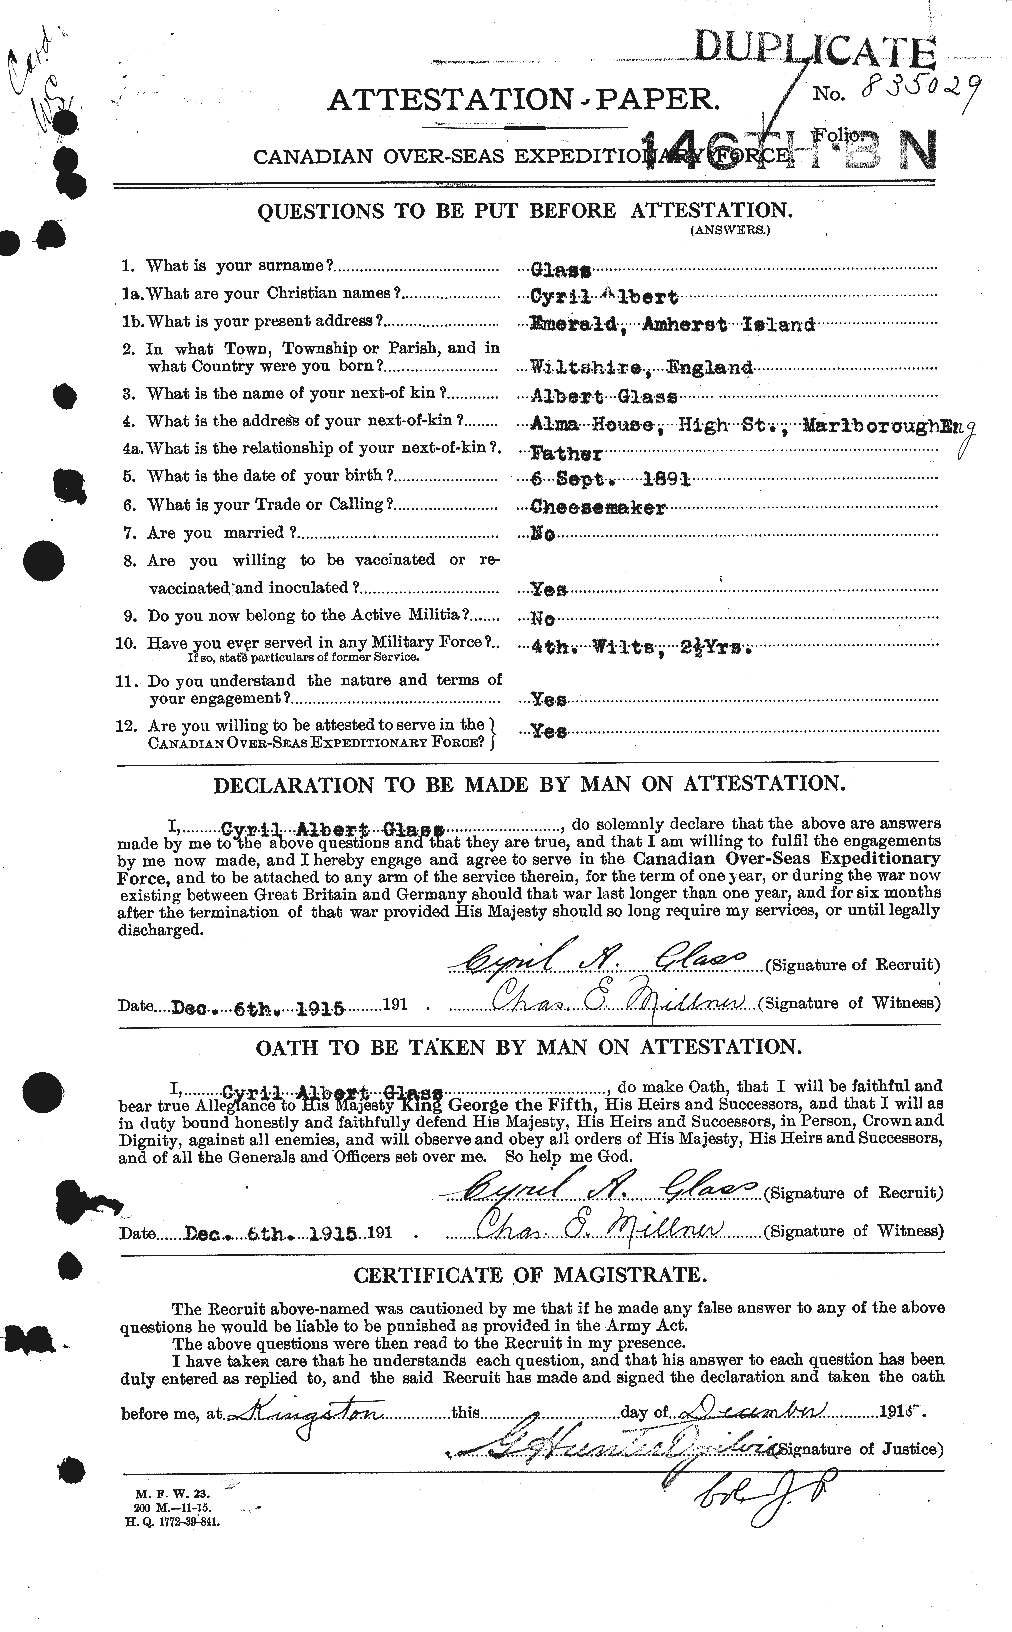 Personnel Records of the First World War - CEF 352033a